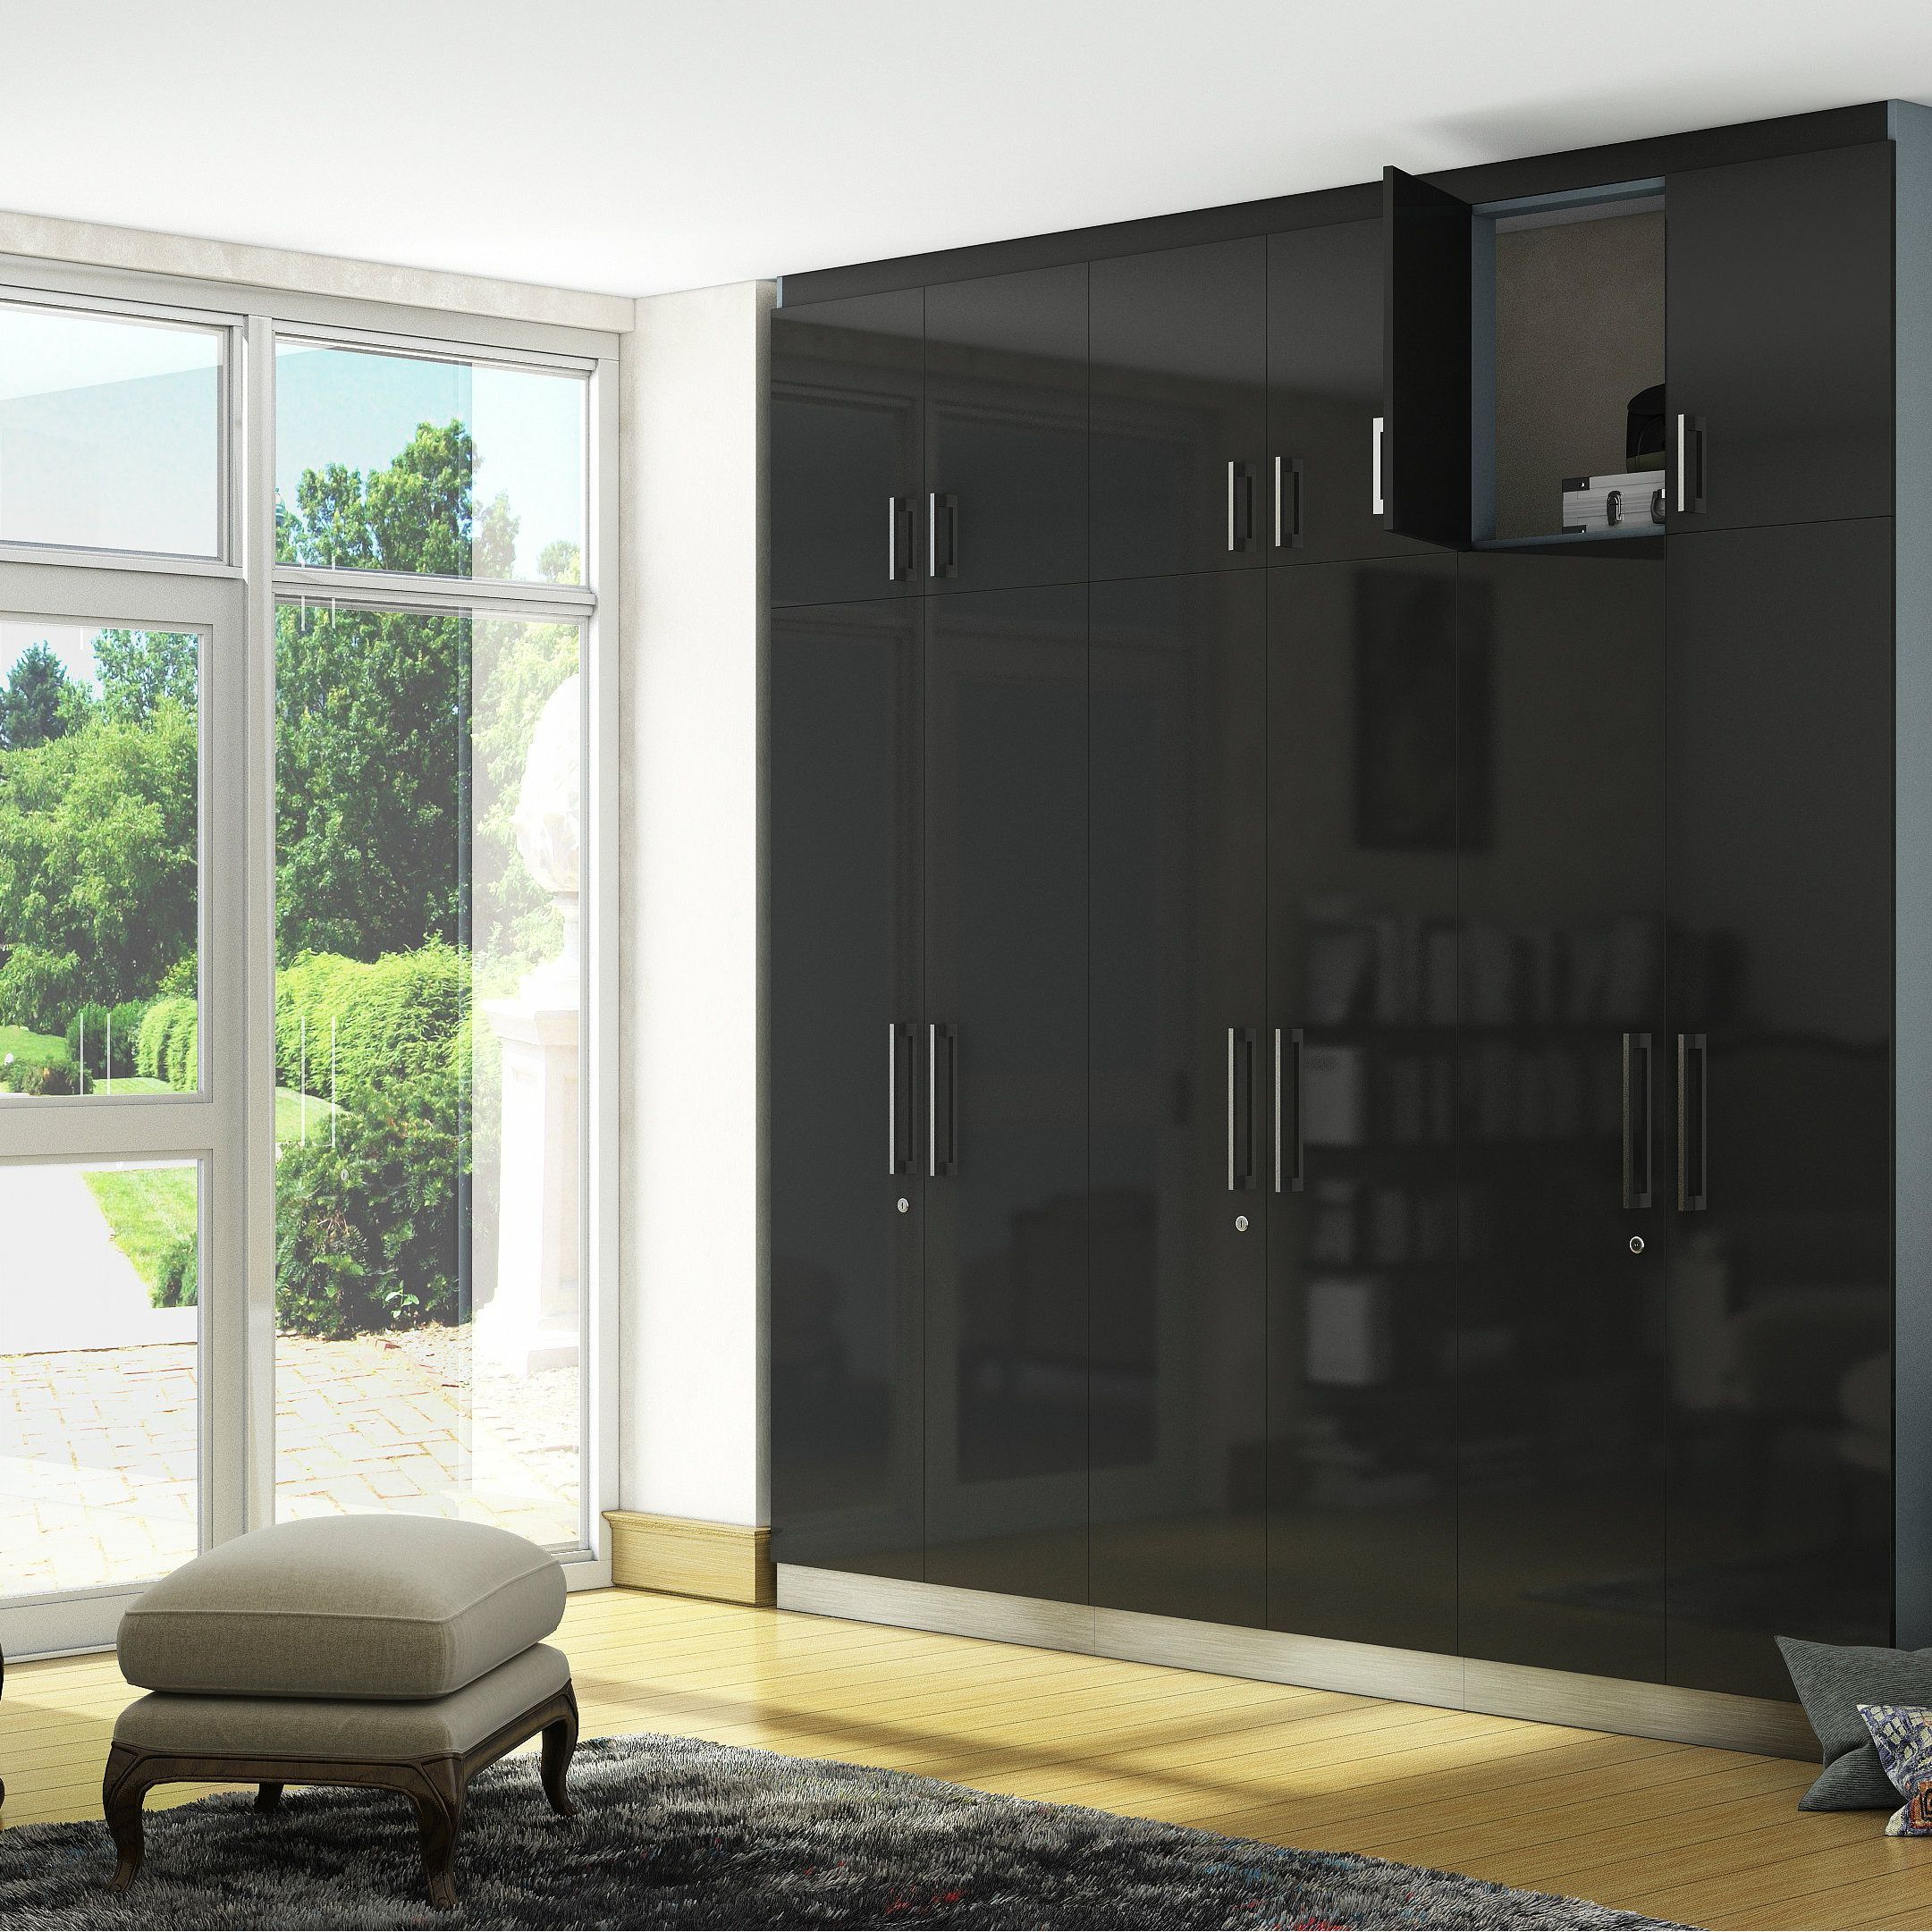 A Glossy Black Wardrobe That Is Every Bit As Impressive And Functional |  Wardrobe Design, Furniture Design, Grey Wardrobe Inside Gloss Black Wardrobes (Gallery 3 of 20)